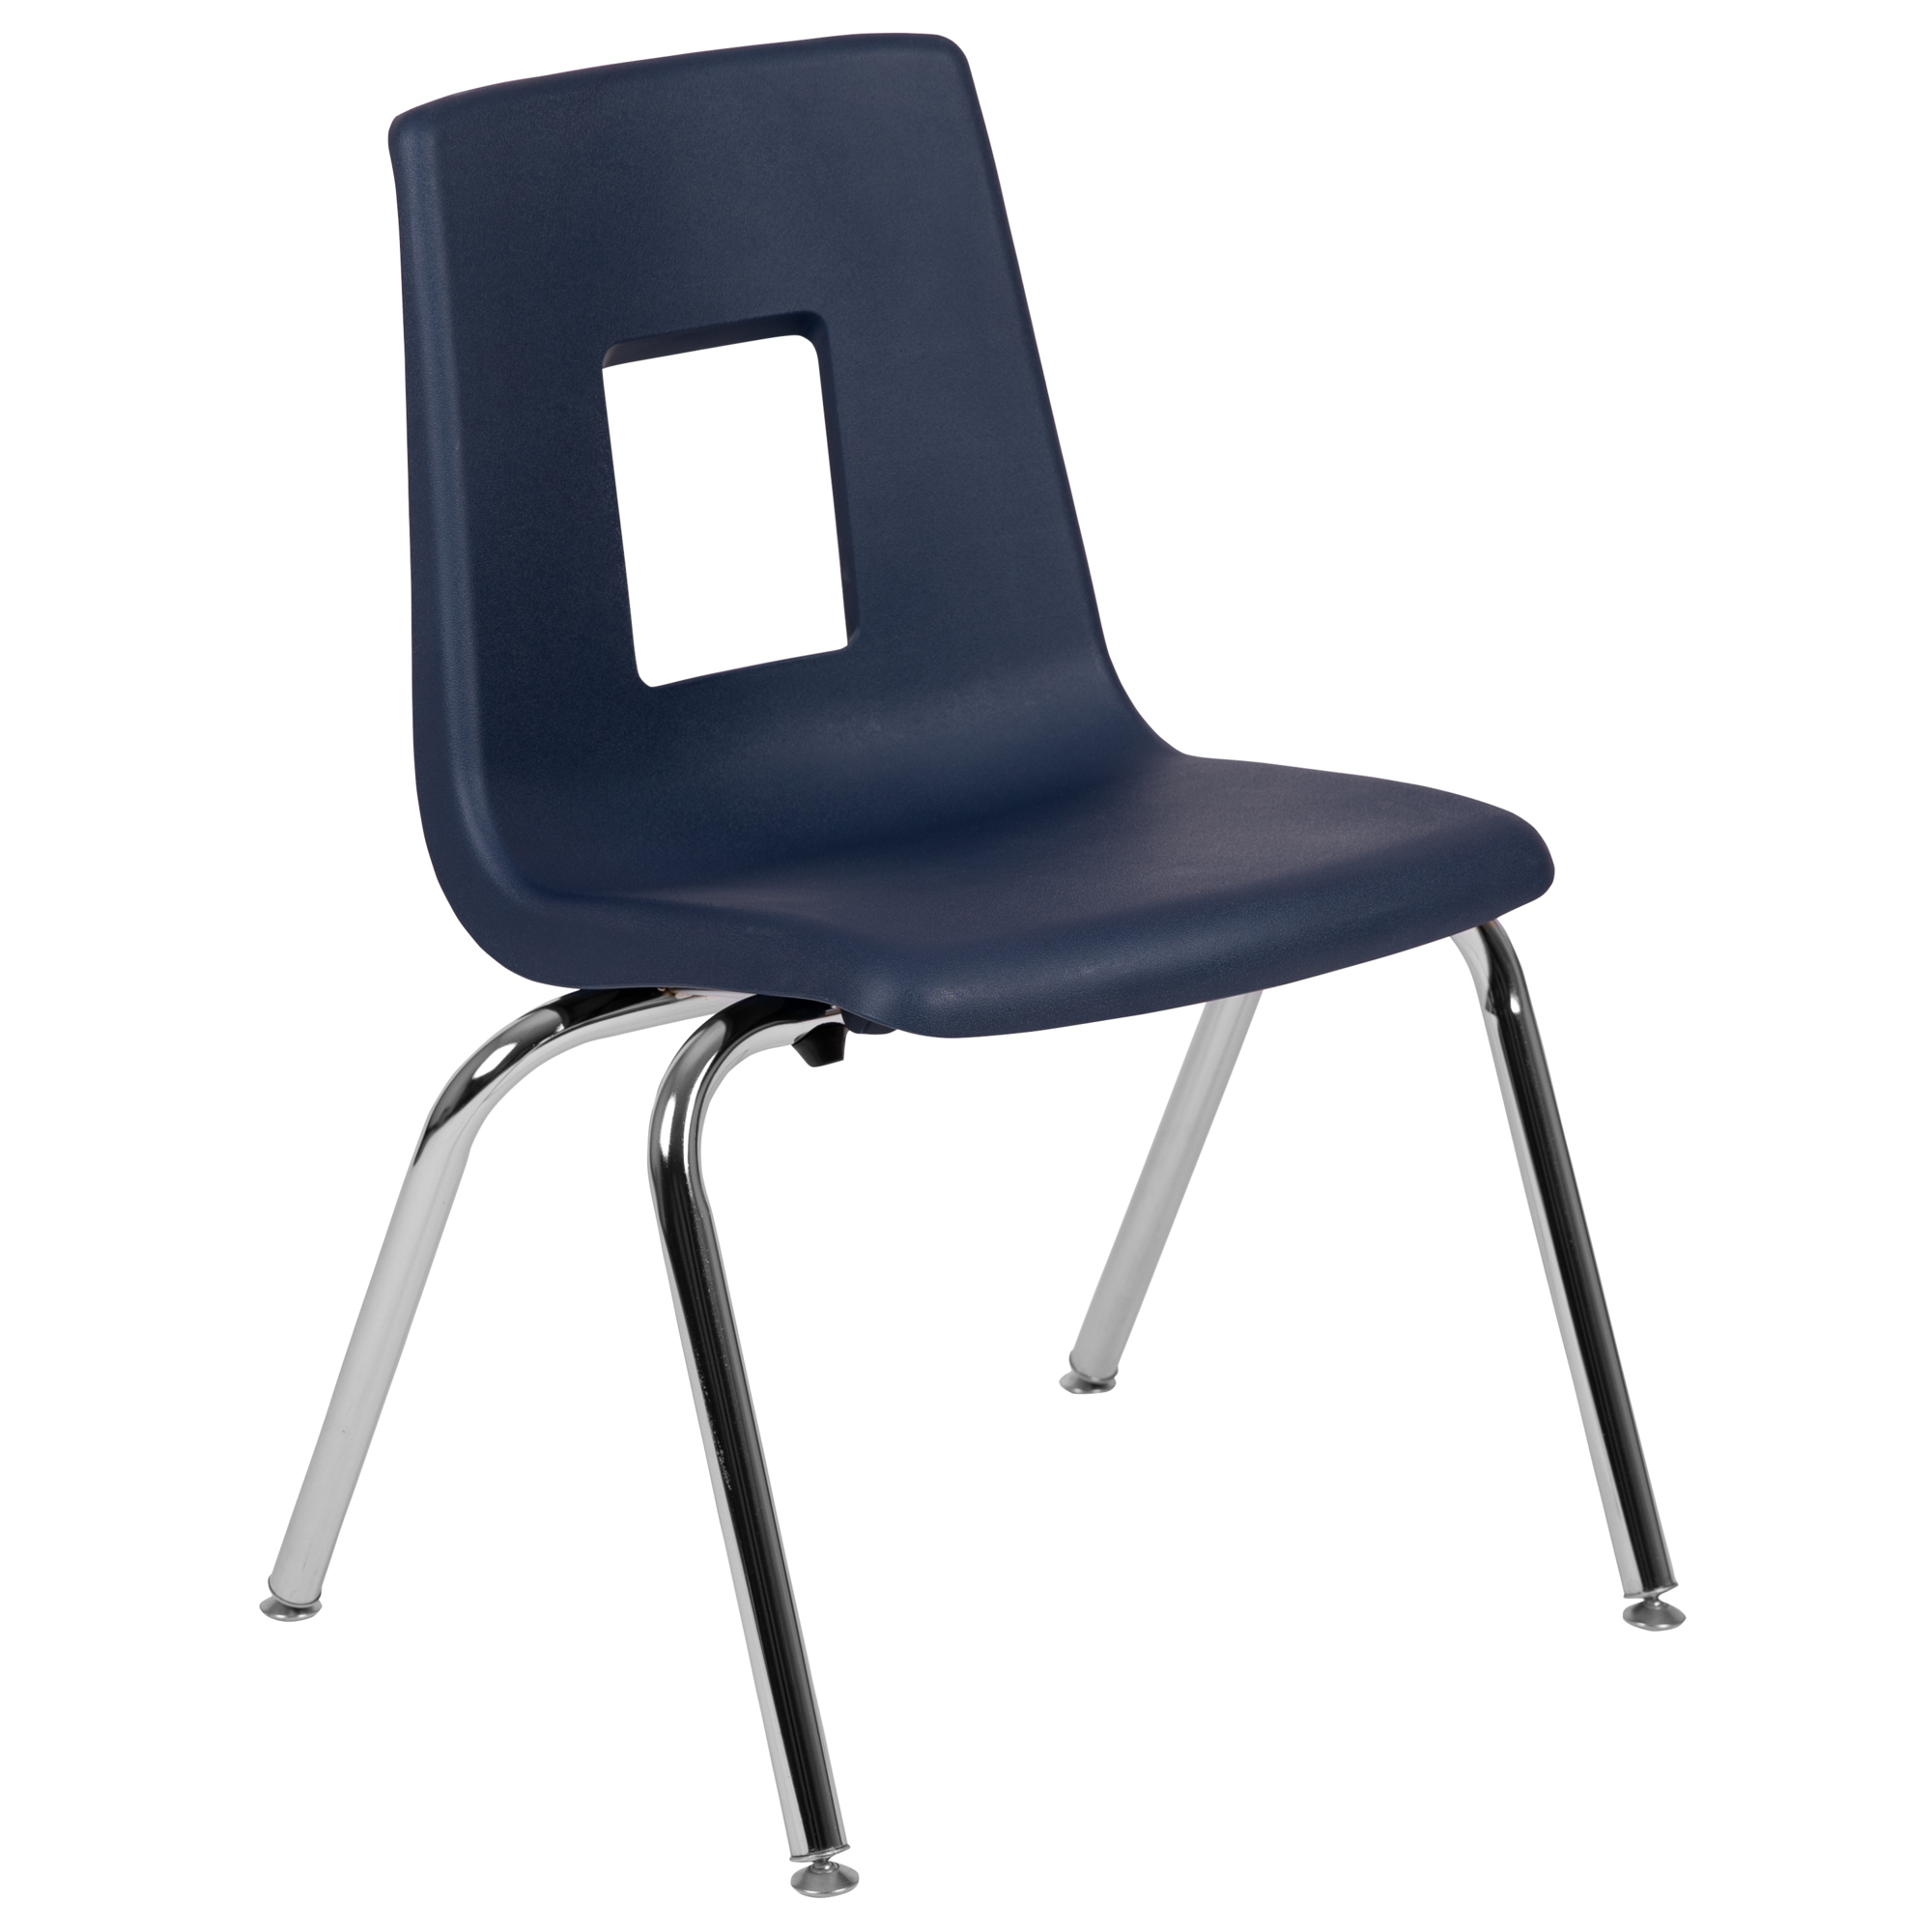 Flash Furniture, Navy Student Stack Chair 16Inch - Classroom Chair, Primary Color Blue, Included (qty.) 1, Model ADVSSC16NAVY